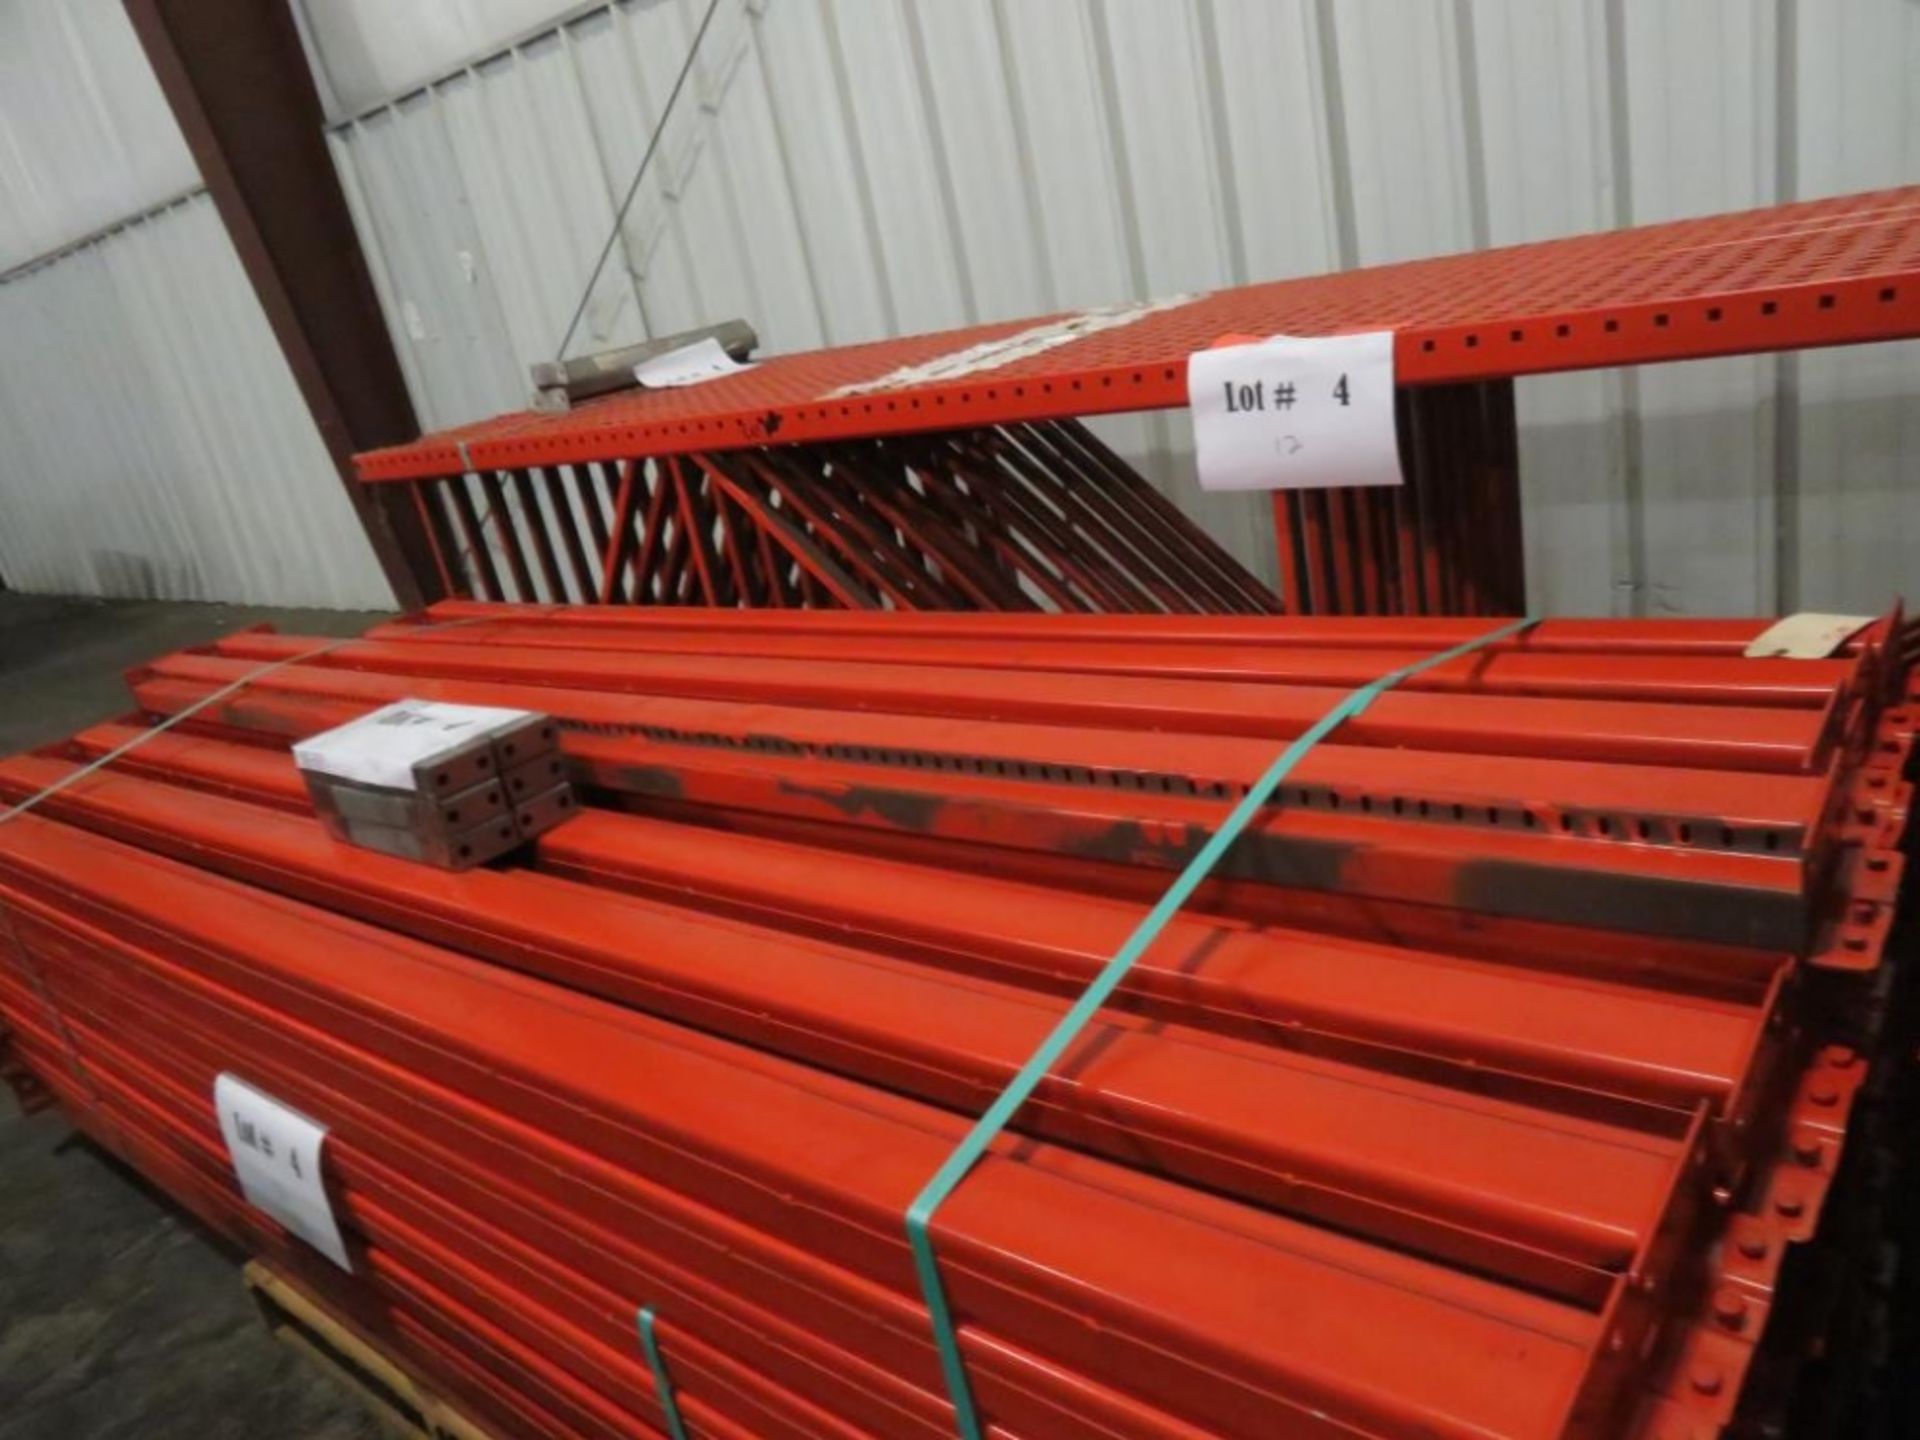 Paltier Pallet Racking 12 uprights 3"x 2 3/4", 42" wide and 18' tall, 66 beams 4 1/2 "x 2 3/4" & - Image 2 of 7